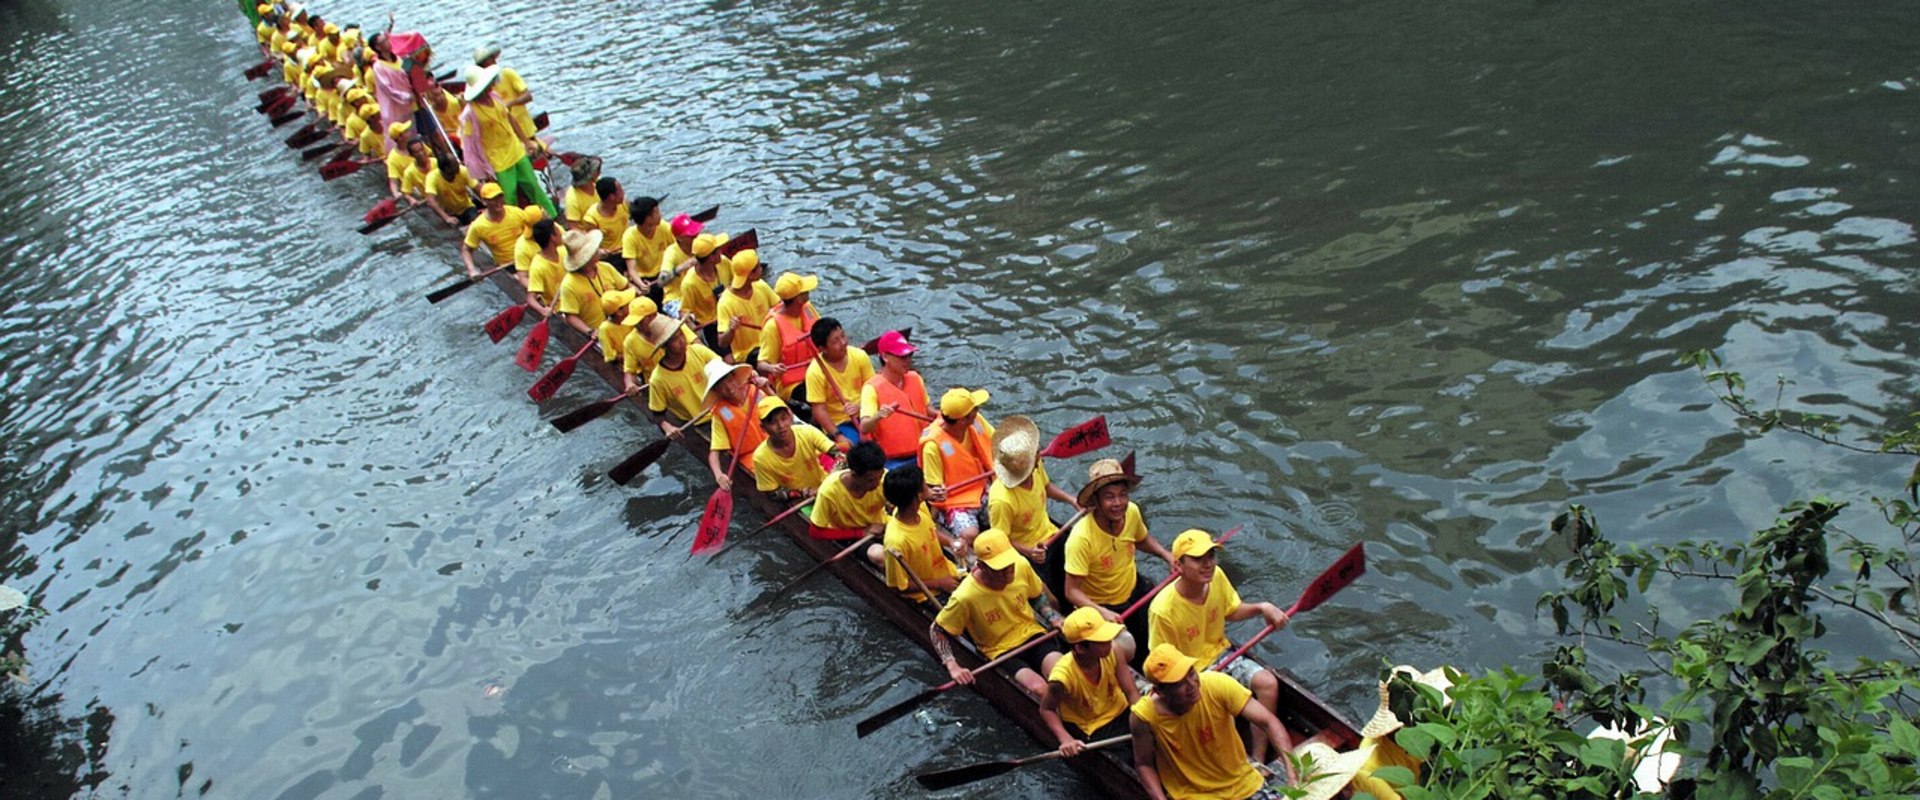 Dragon Boat Racing in Orlando, Florida: What Type of Paddles Should You Use?